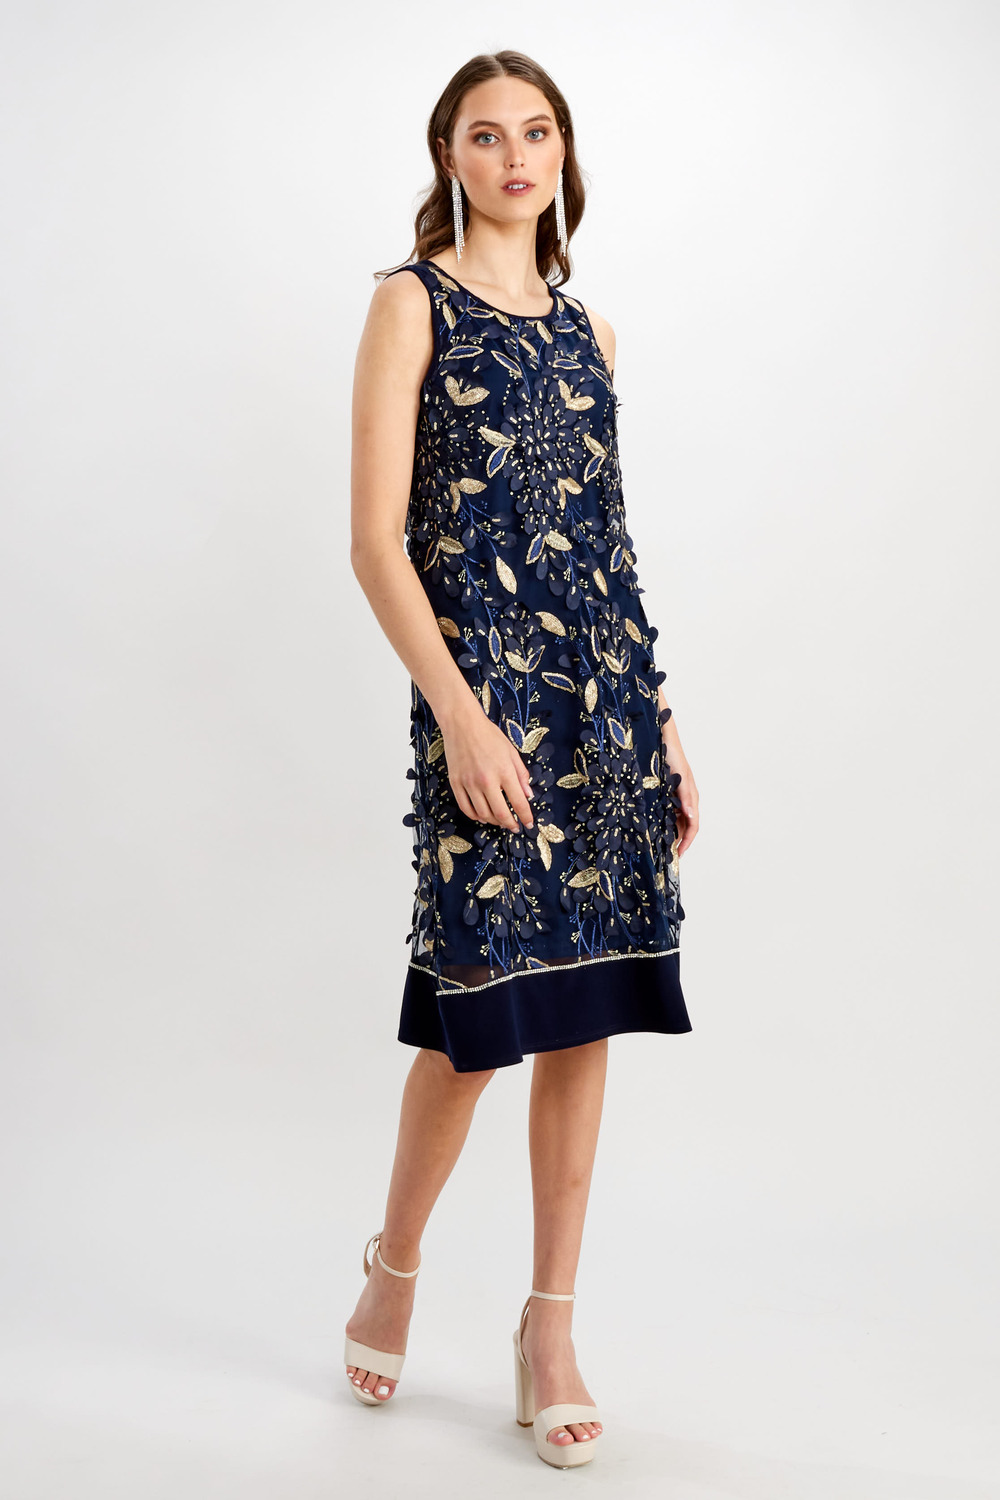 Sequin Floral Tank Dress Style 248320 (midnight blue/gold)